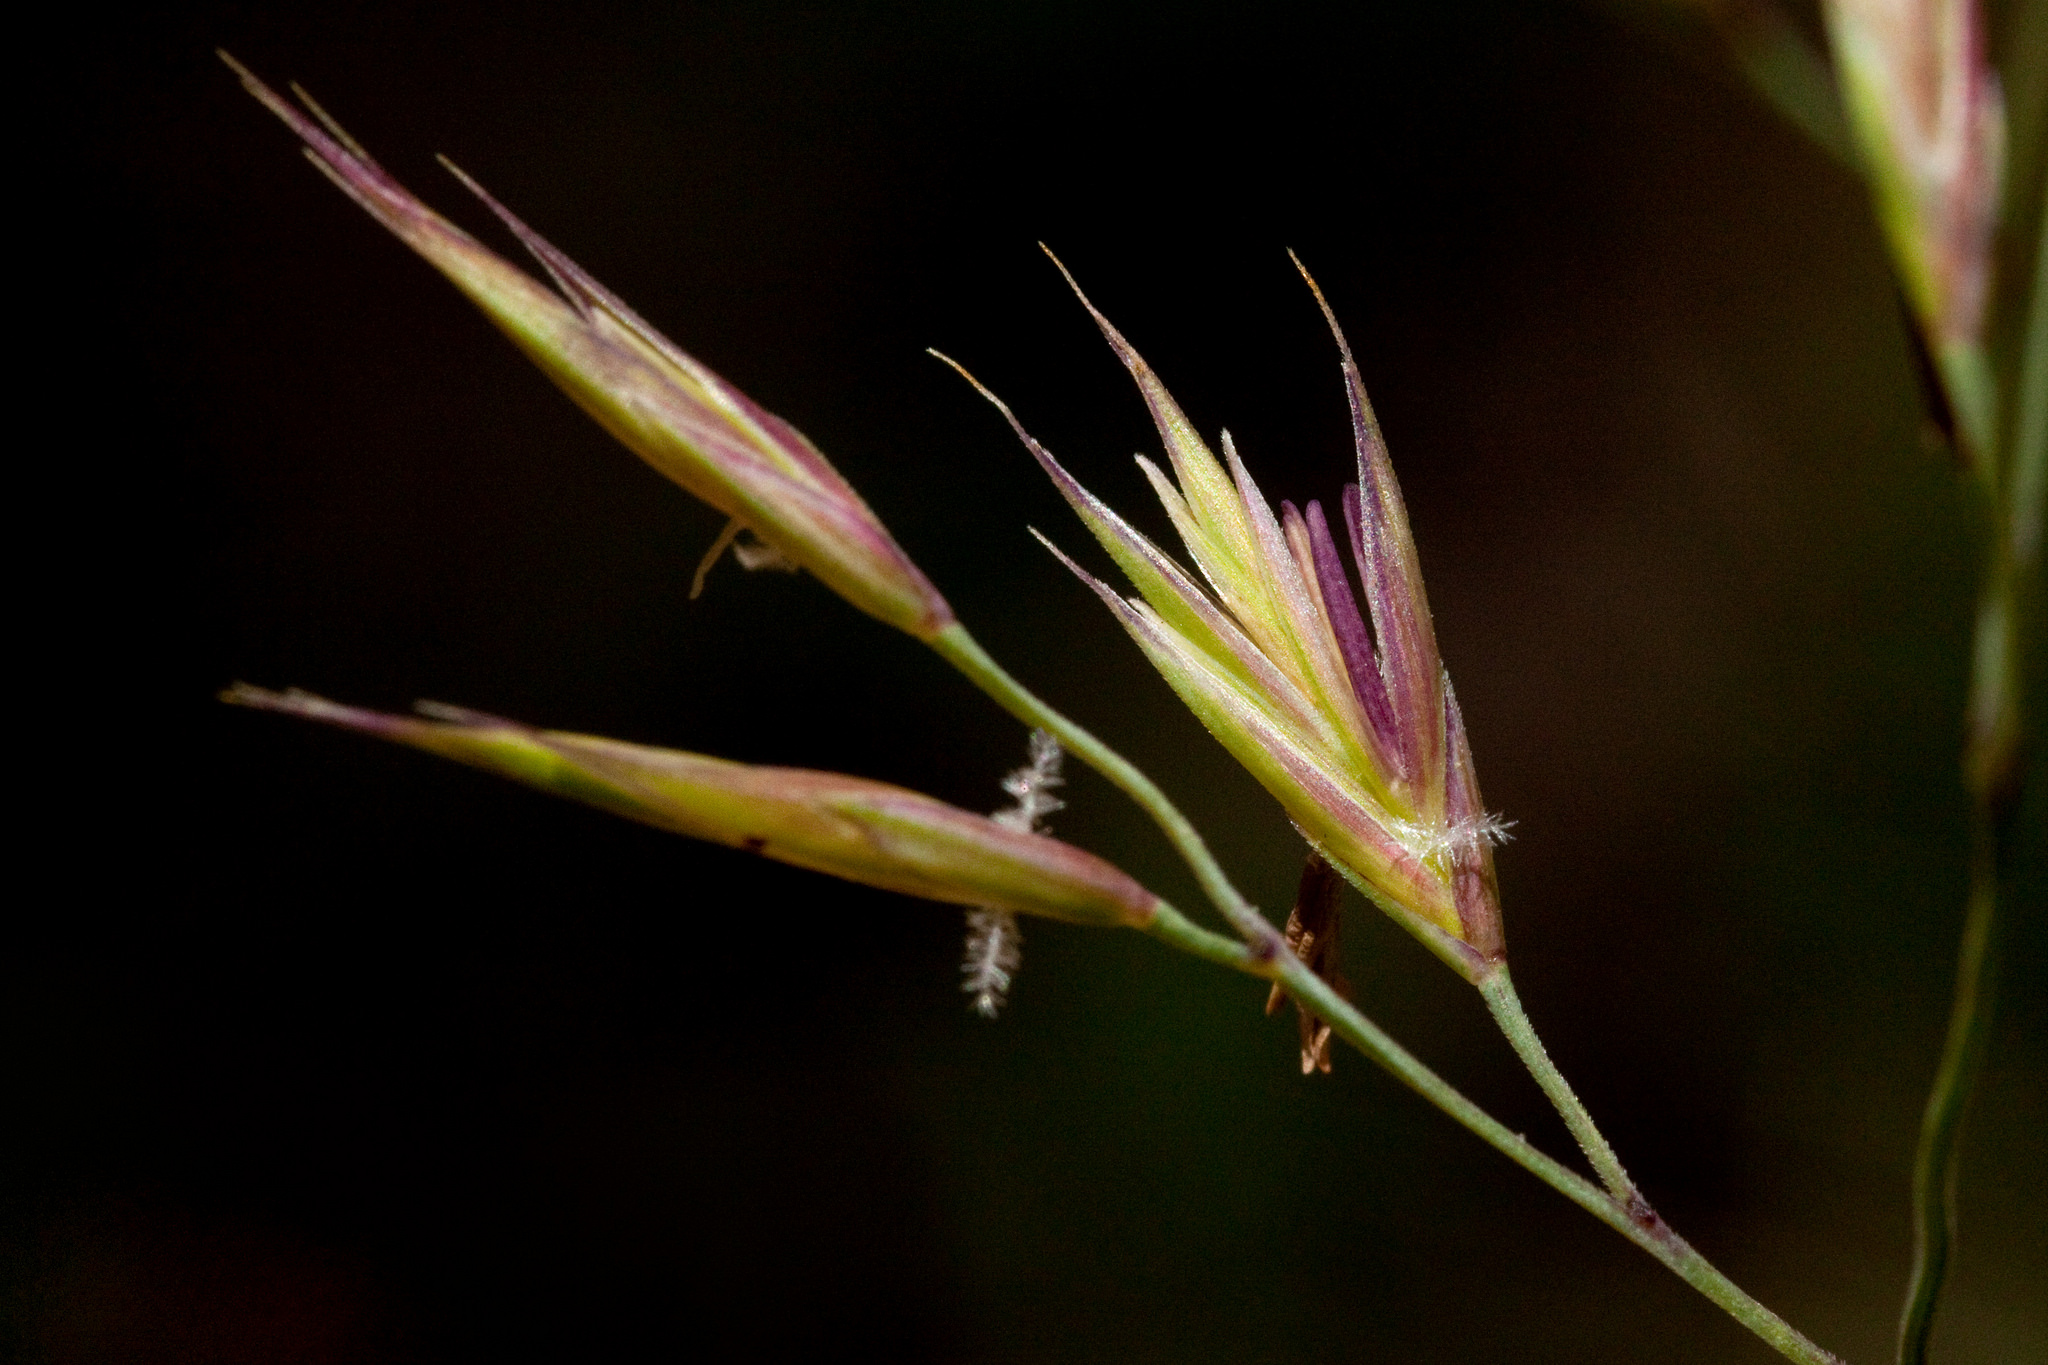 Close-up of florets, showing the purplish glumes (protective scales)